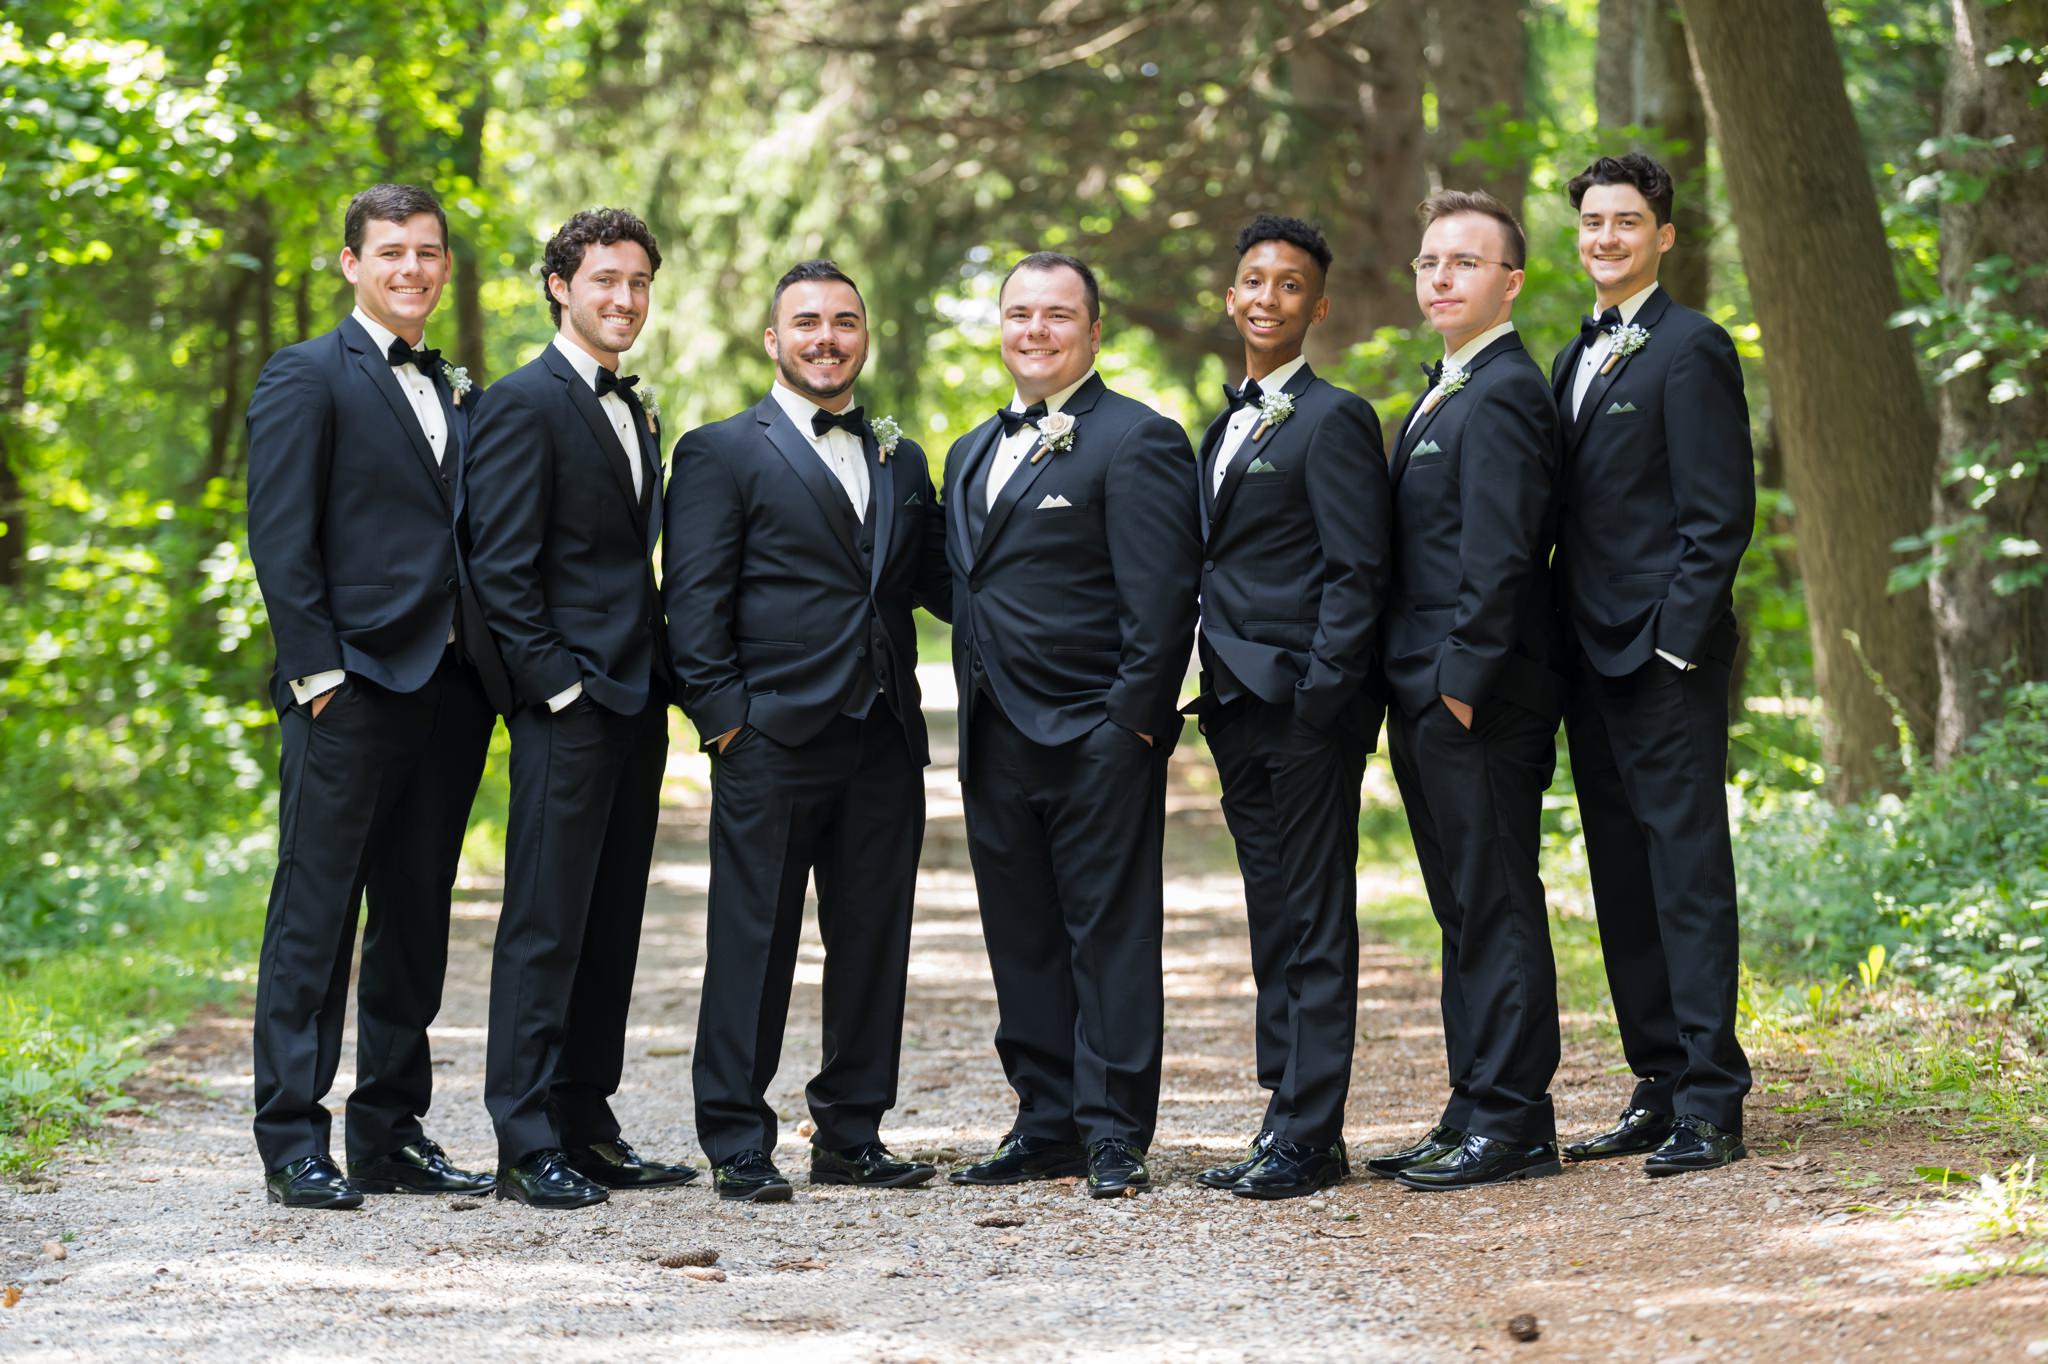 Groomsmen pose for a photo at a Stony Creek wedding in Shelby Township, MI